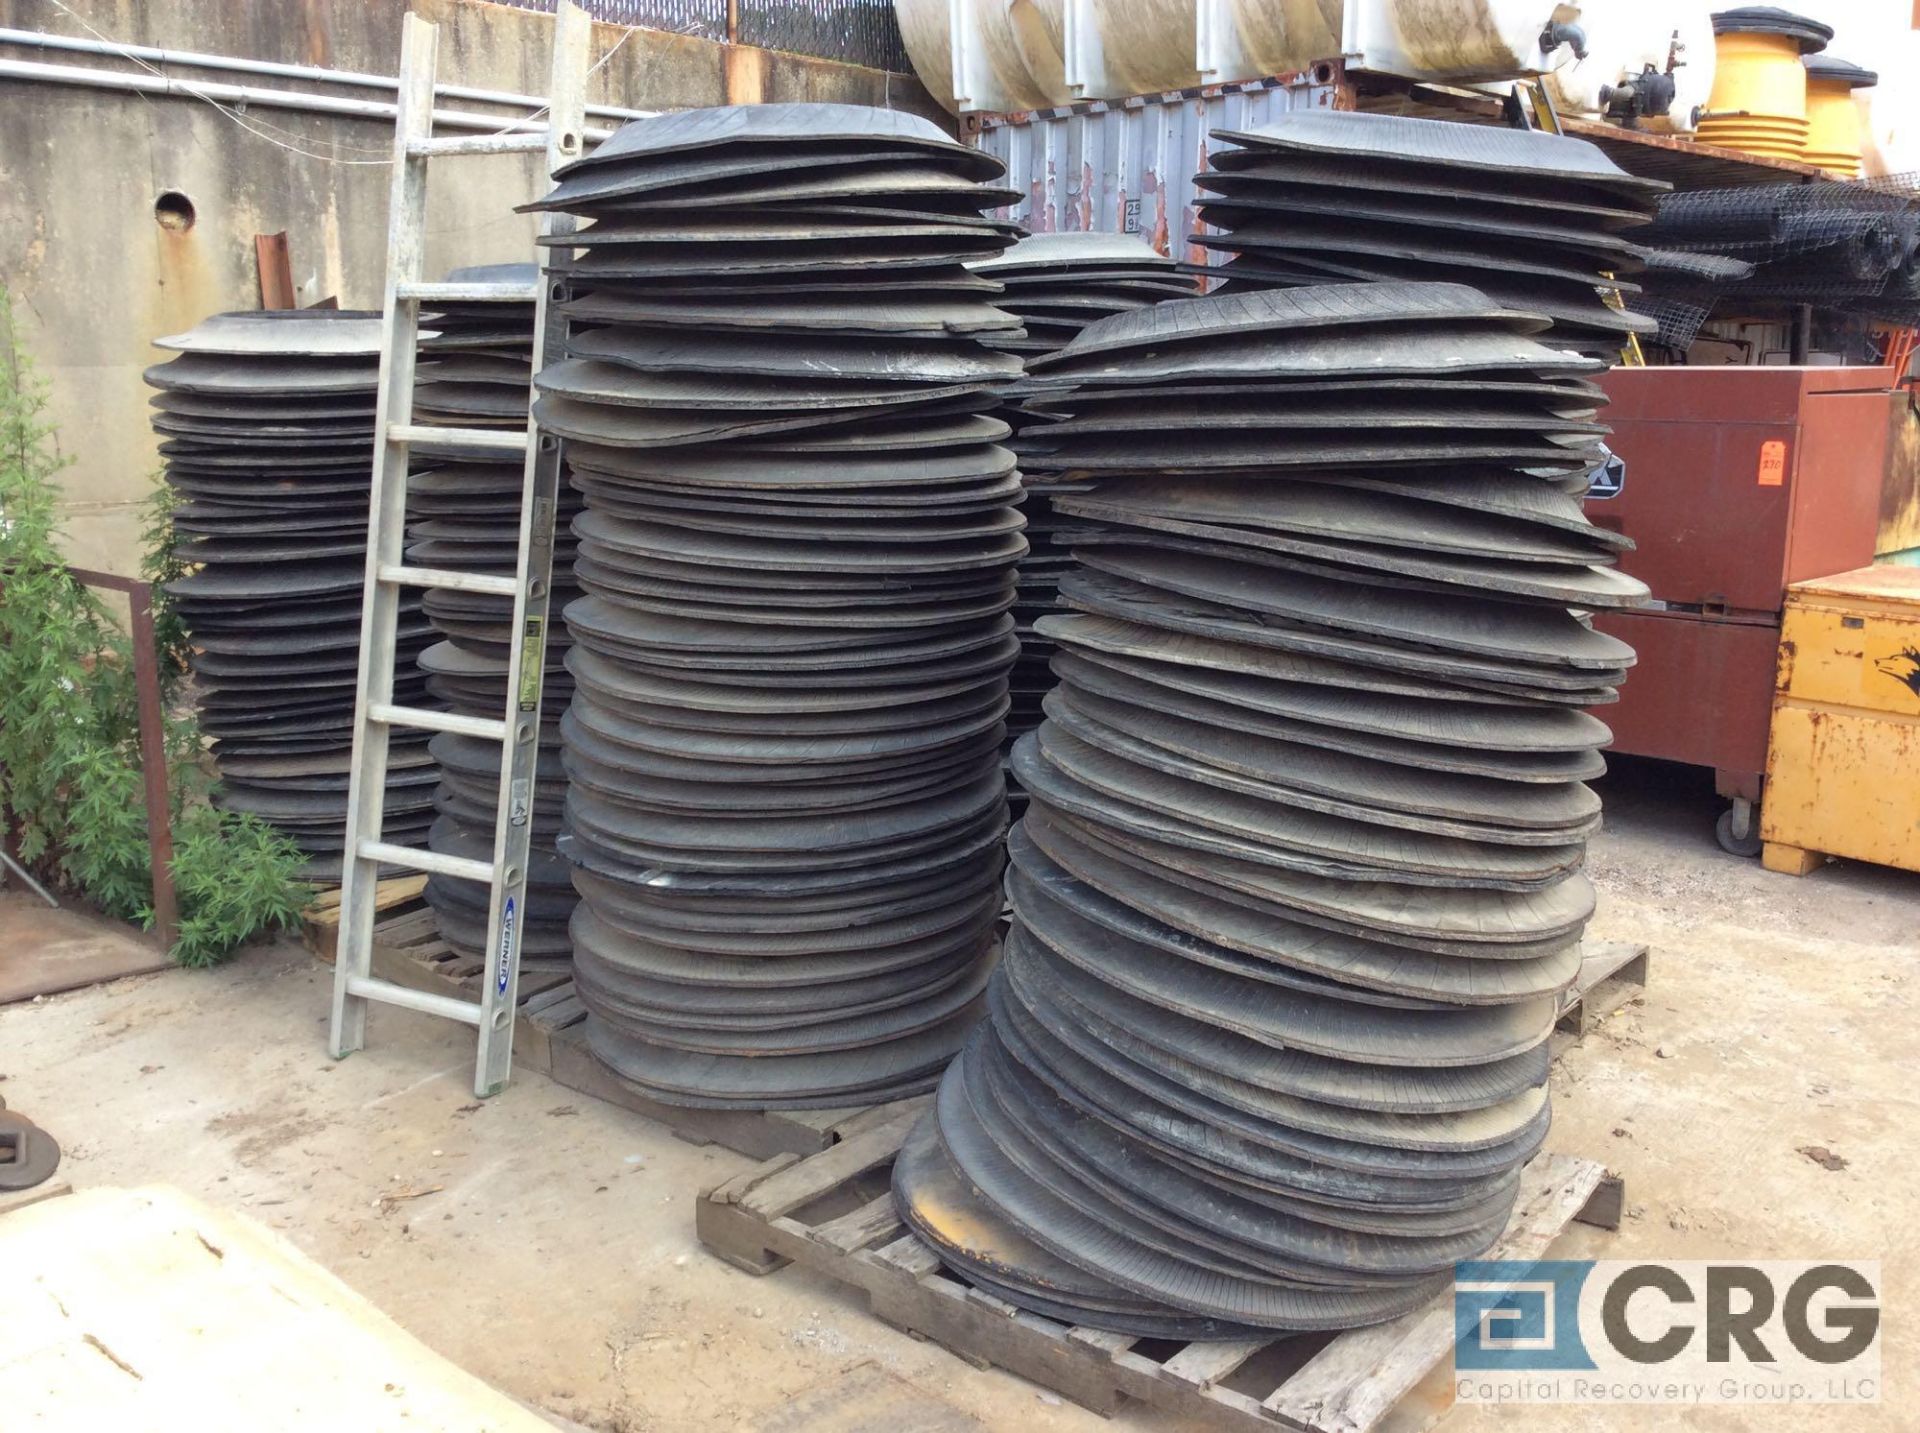 Lot of asst road construction barrels with ring weights. (BARRELS LOCATED IN 2 CONTAINERS STACKED ON